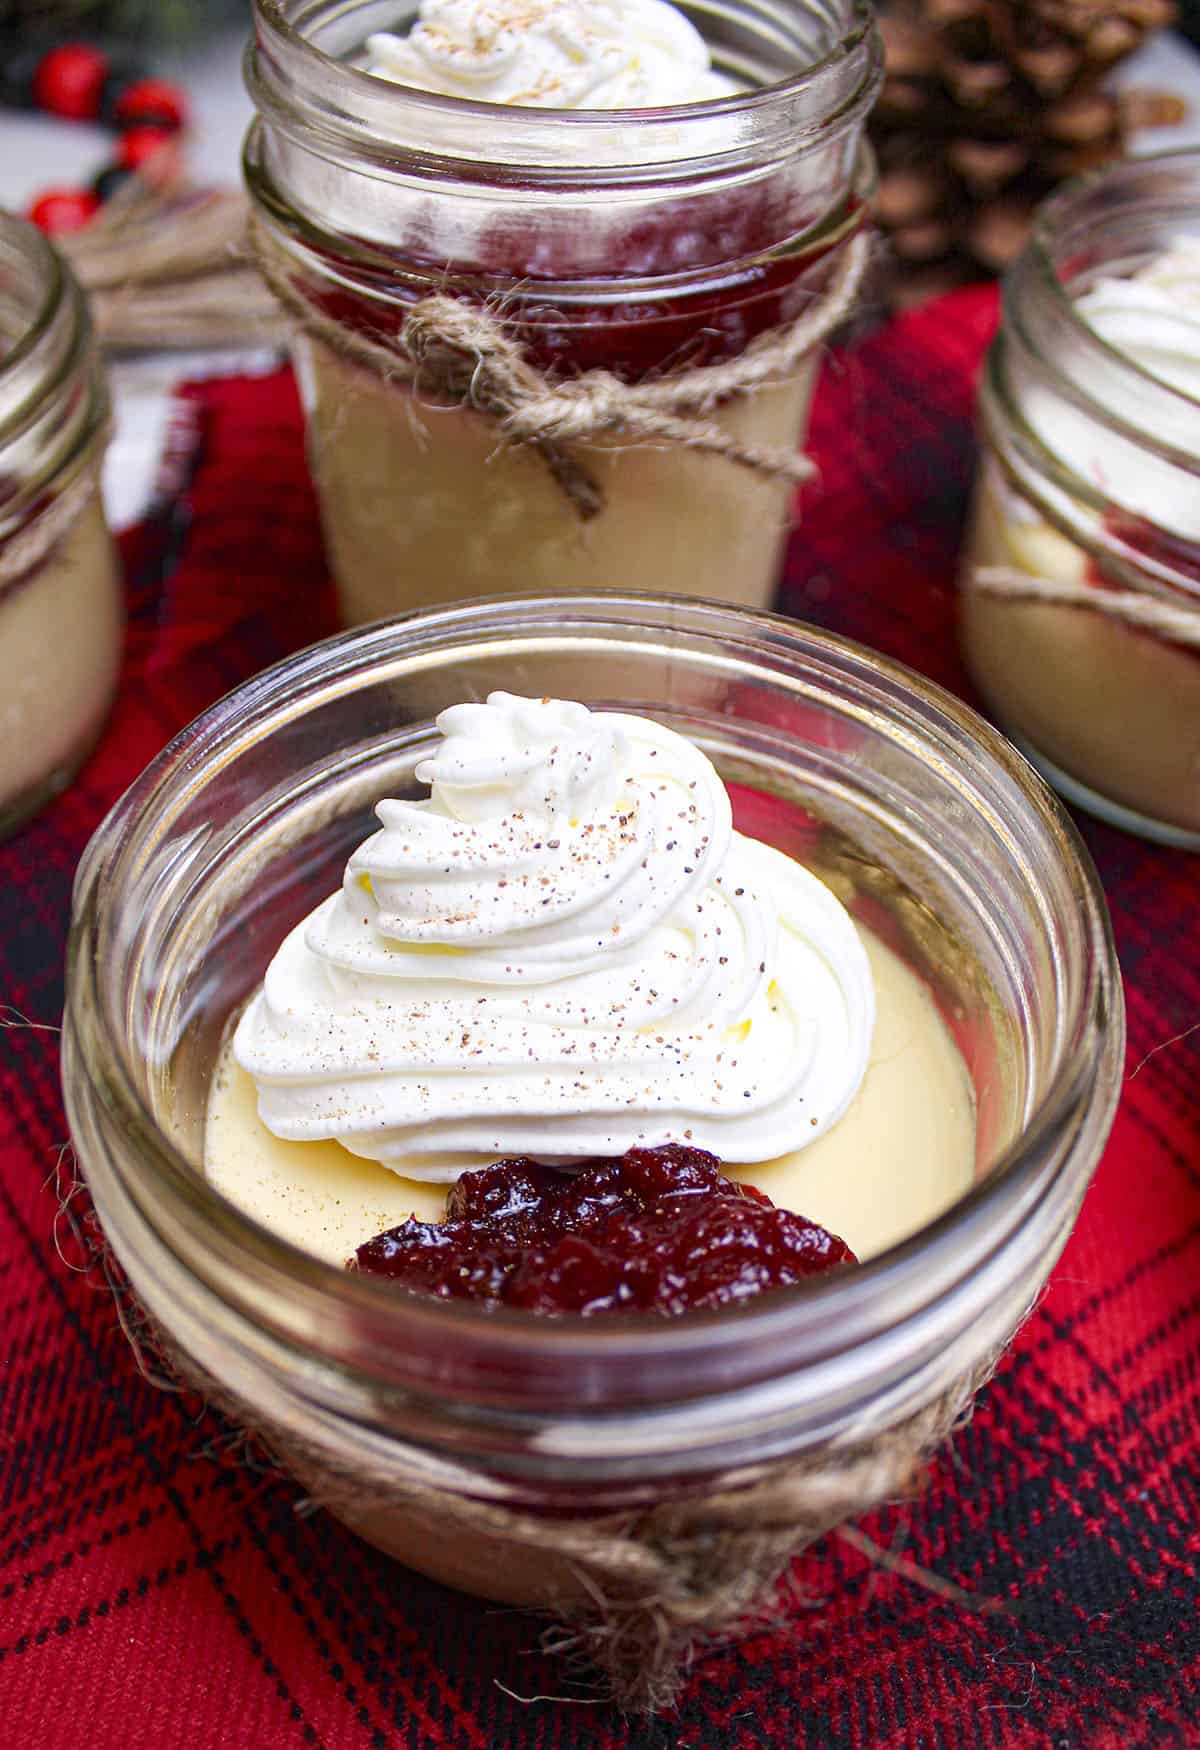 One Christmas panna cotta dessert with whipped cream and sweet cranberry sauce on top.